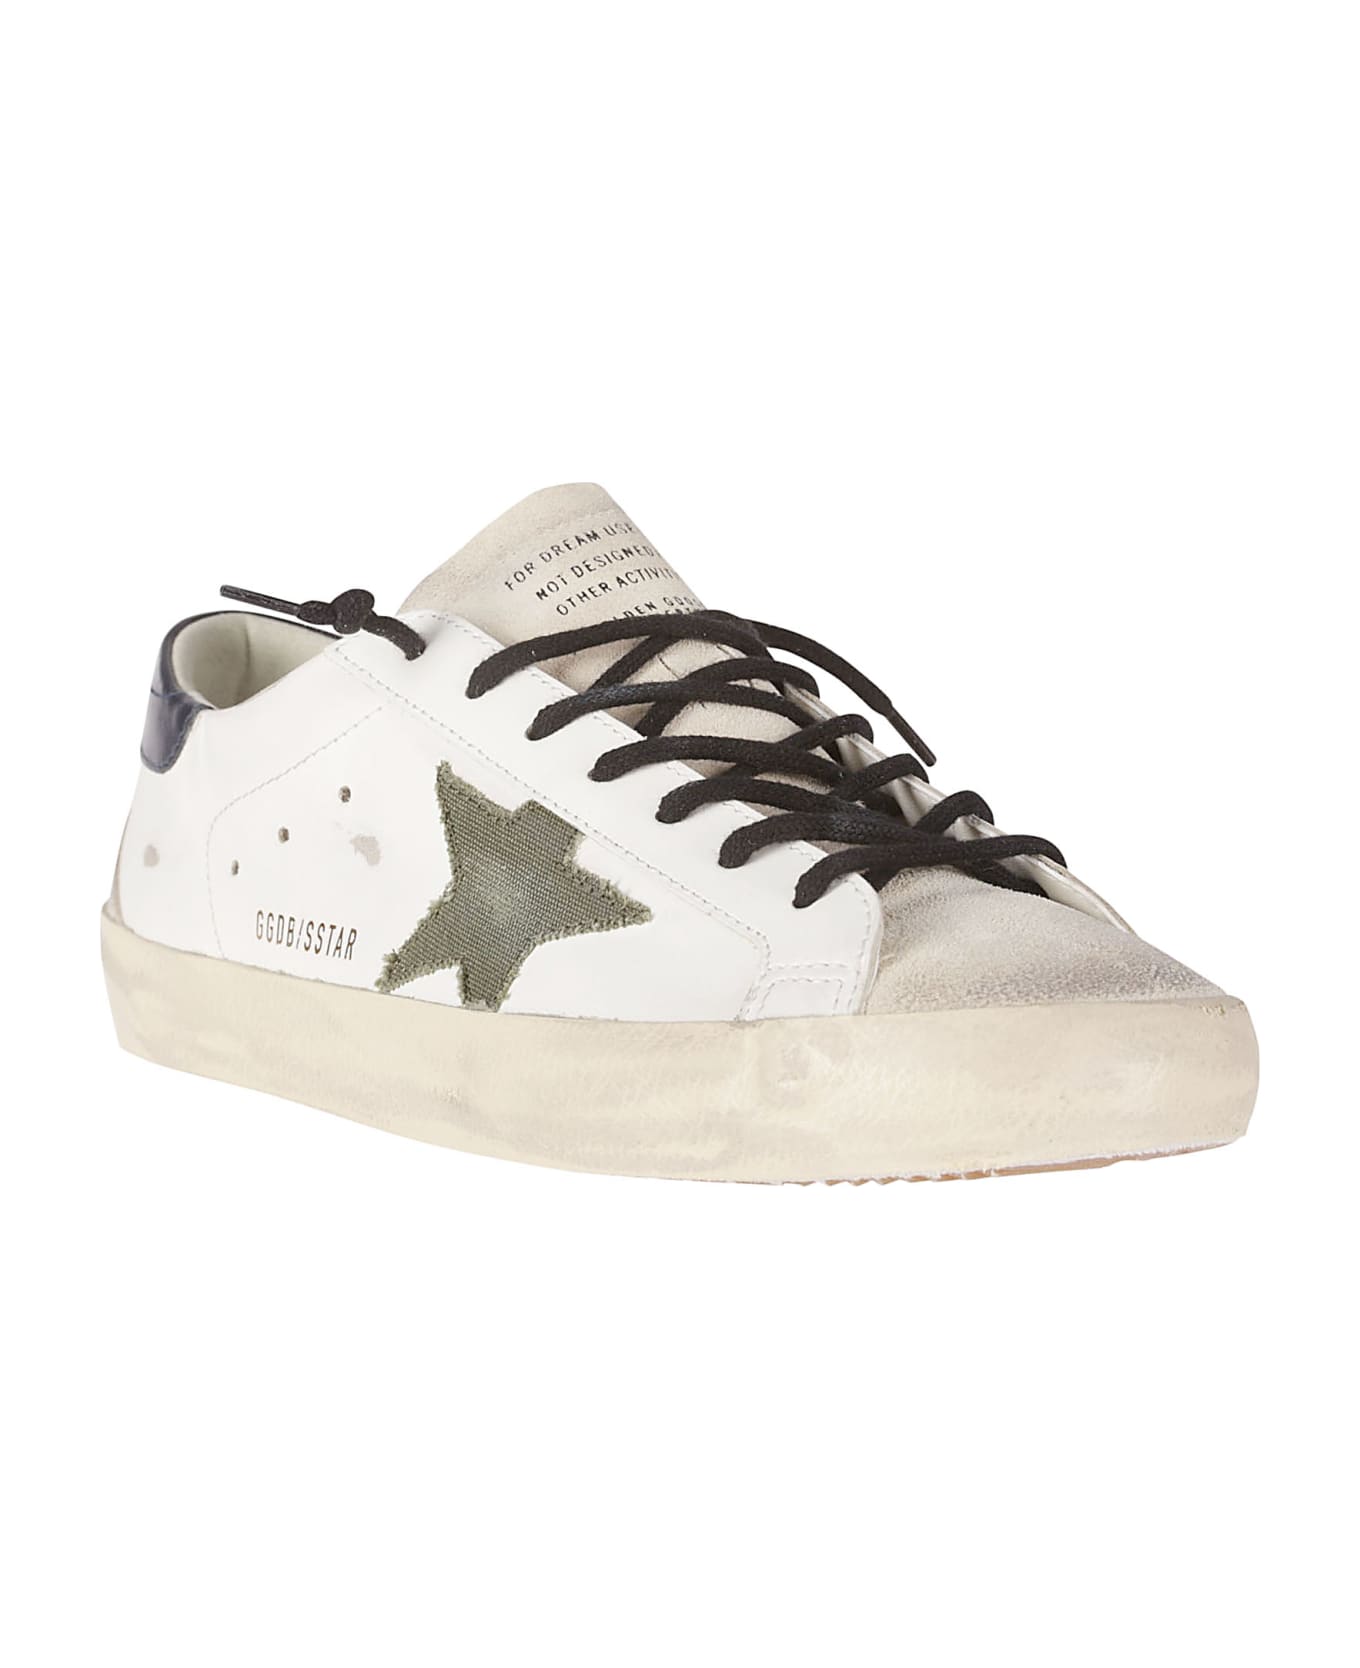 Golden Goose Super-star Sneakers With A Worn Effect - WHITE/SEEDPEARL/GREEN/BLUE